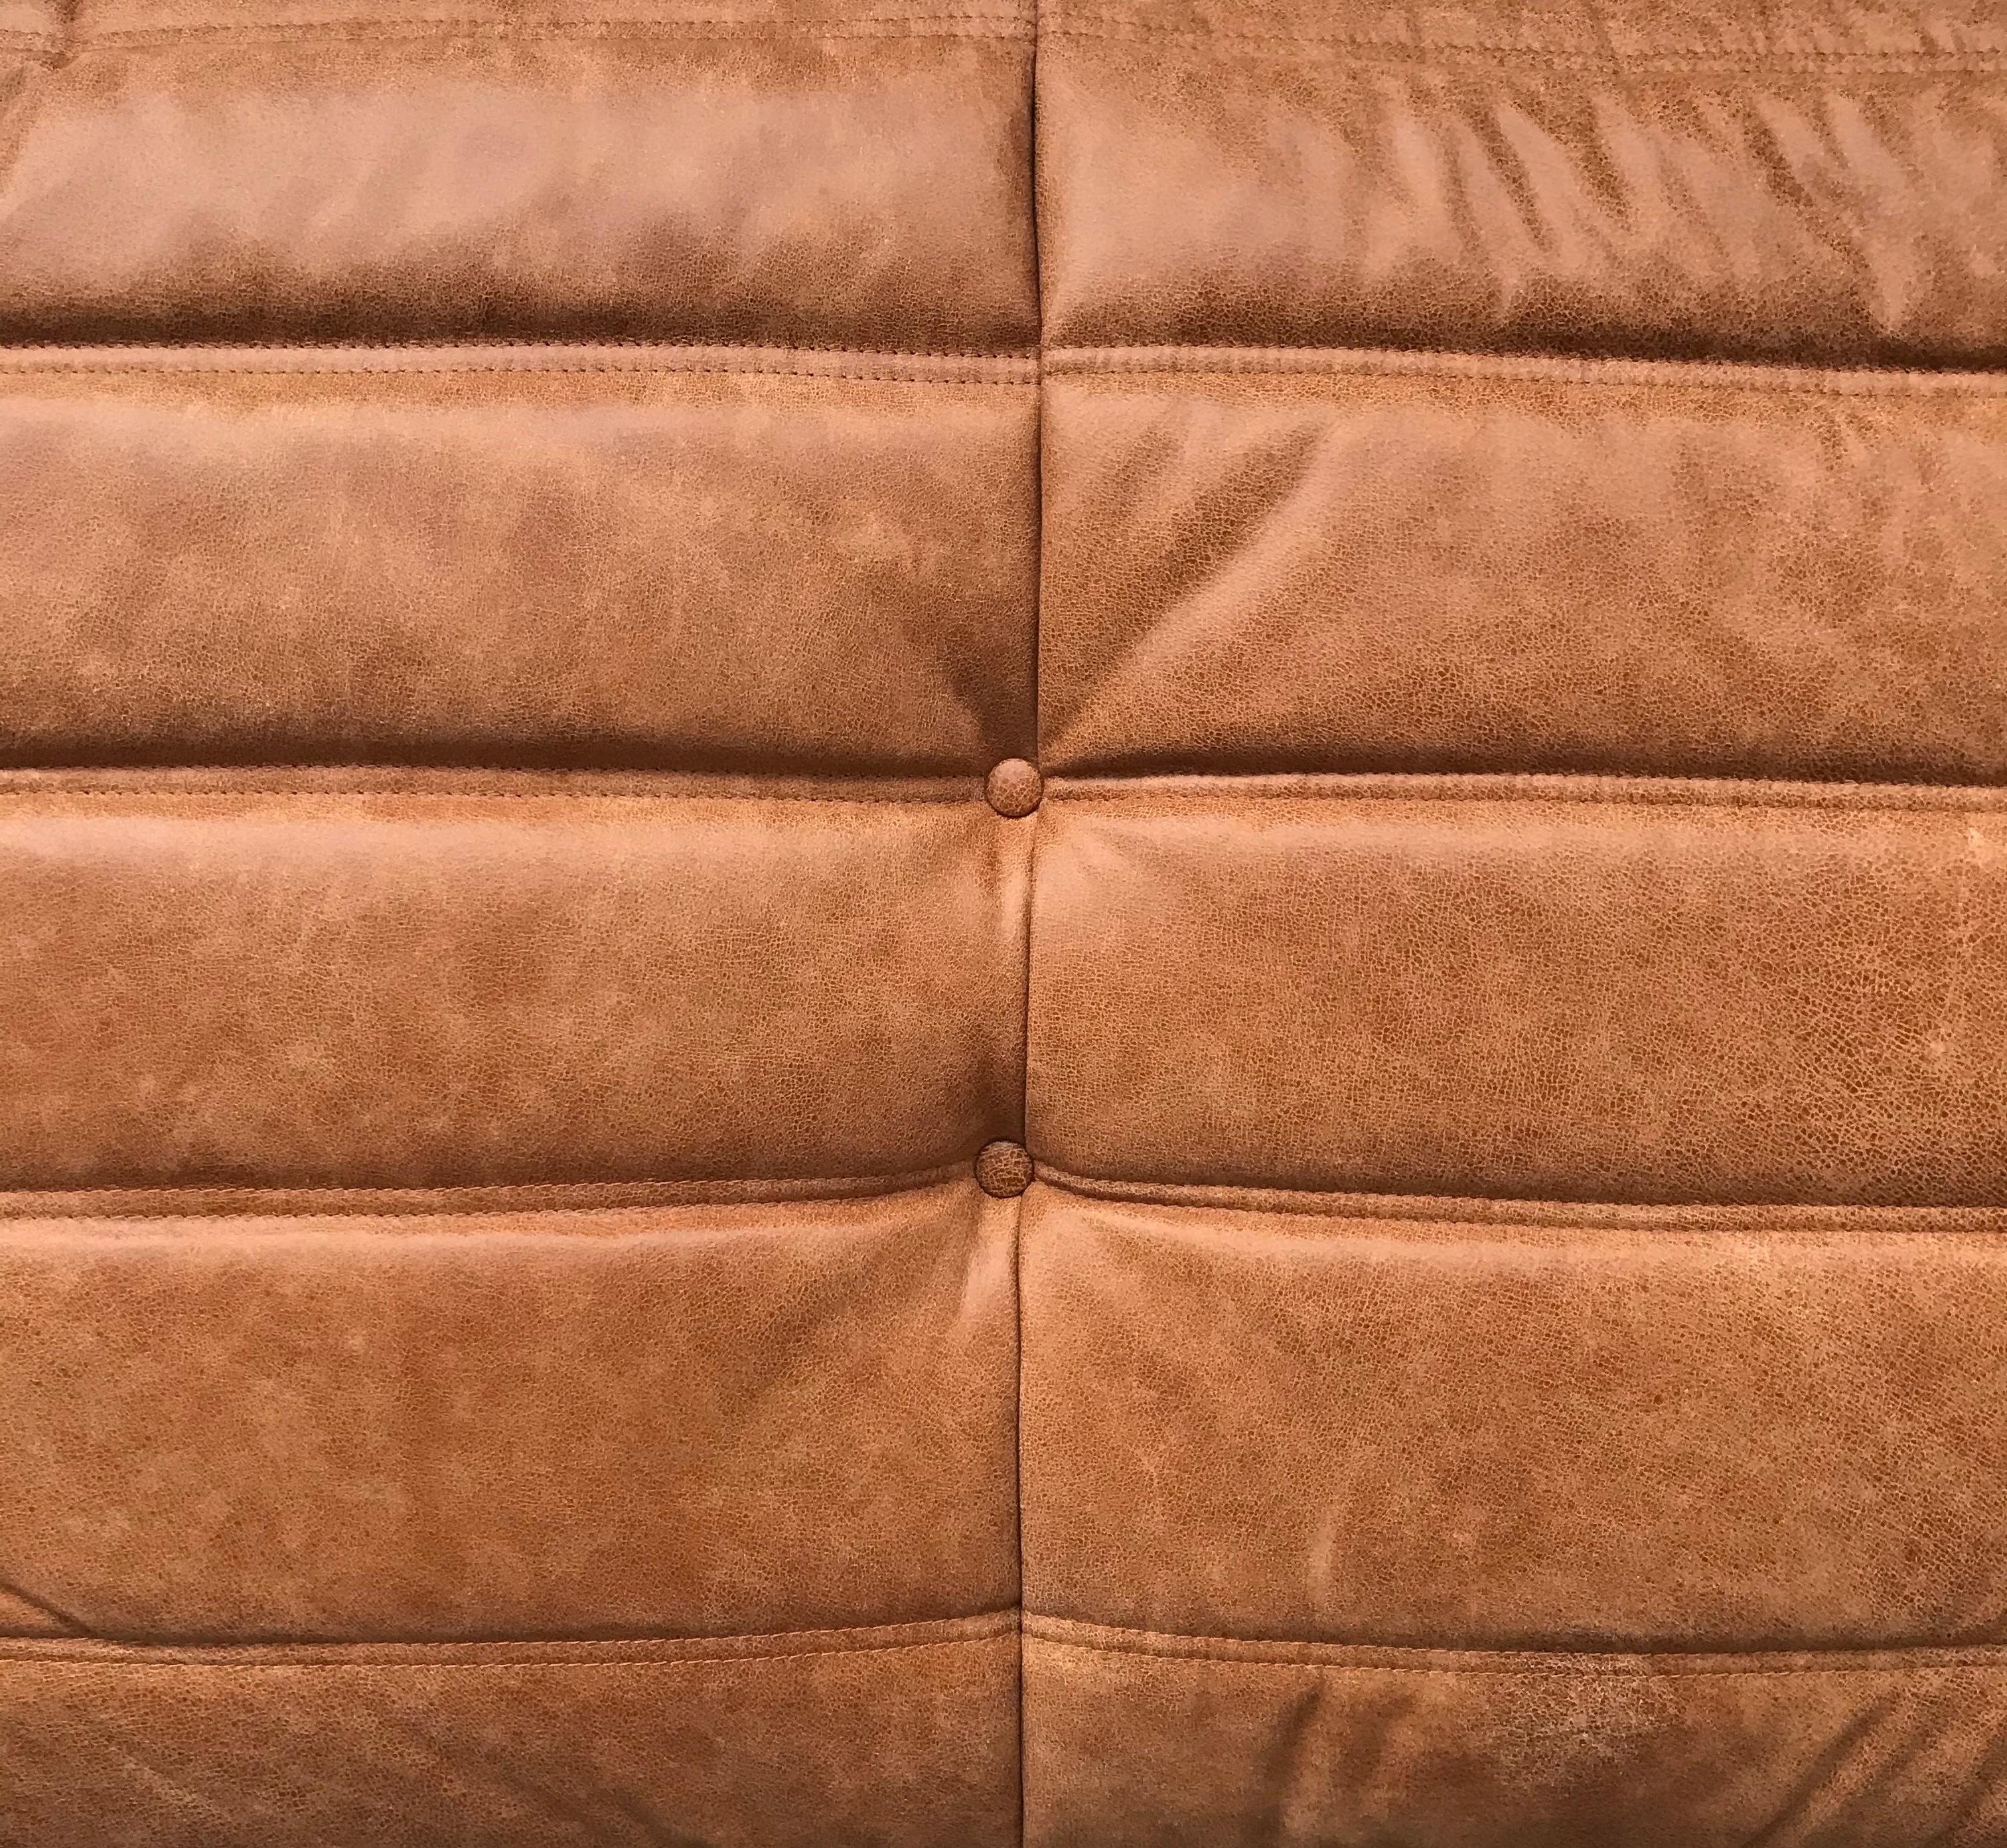 Late 20th Century French Large Togo Sofa in Cognac Leather by Michel Ducaroy for Ligne Roset